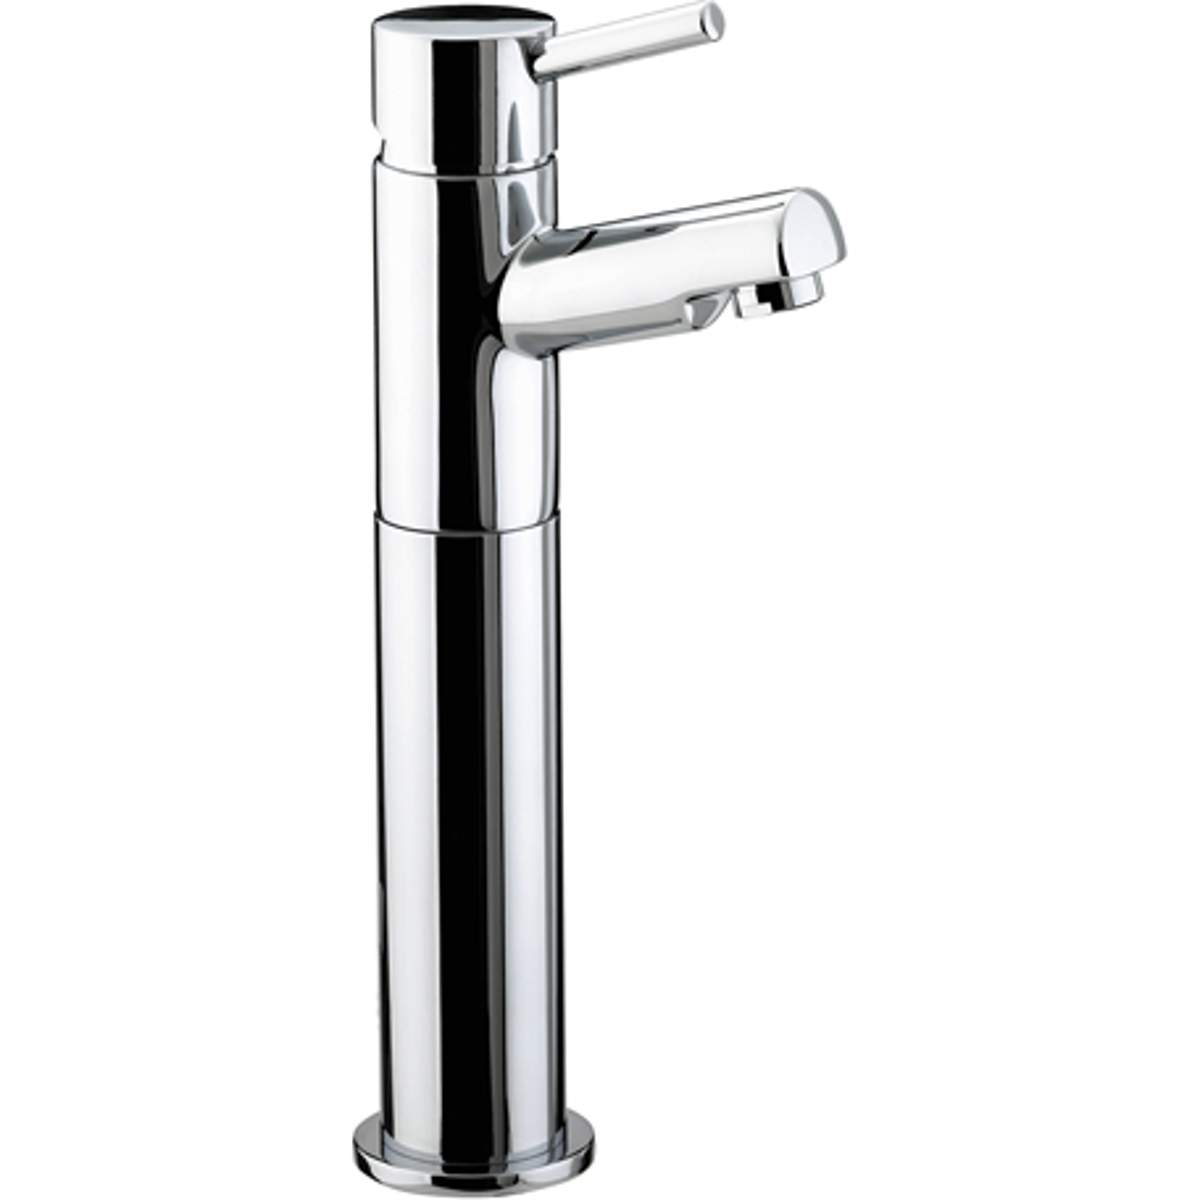 Bristan Prism Tall Basin Mixer without Waste (PM TBAS C)